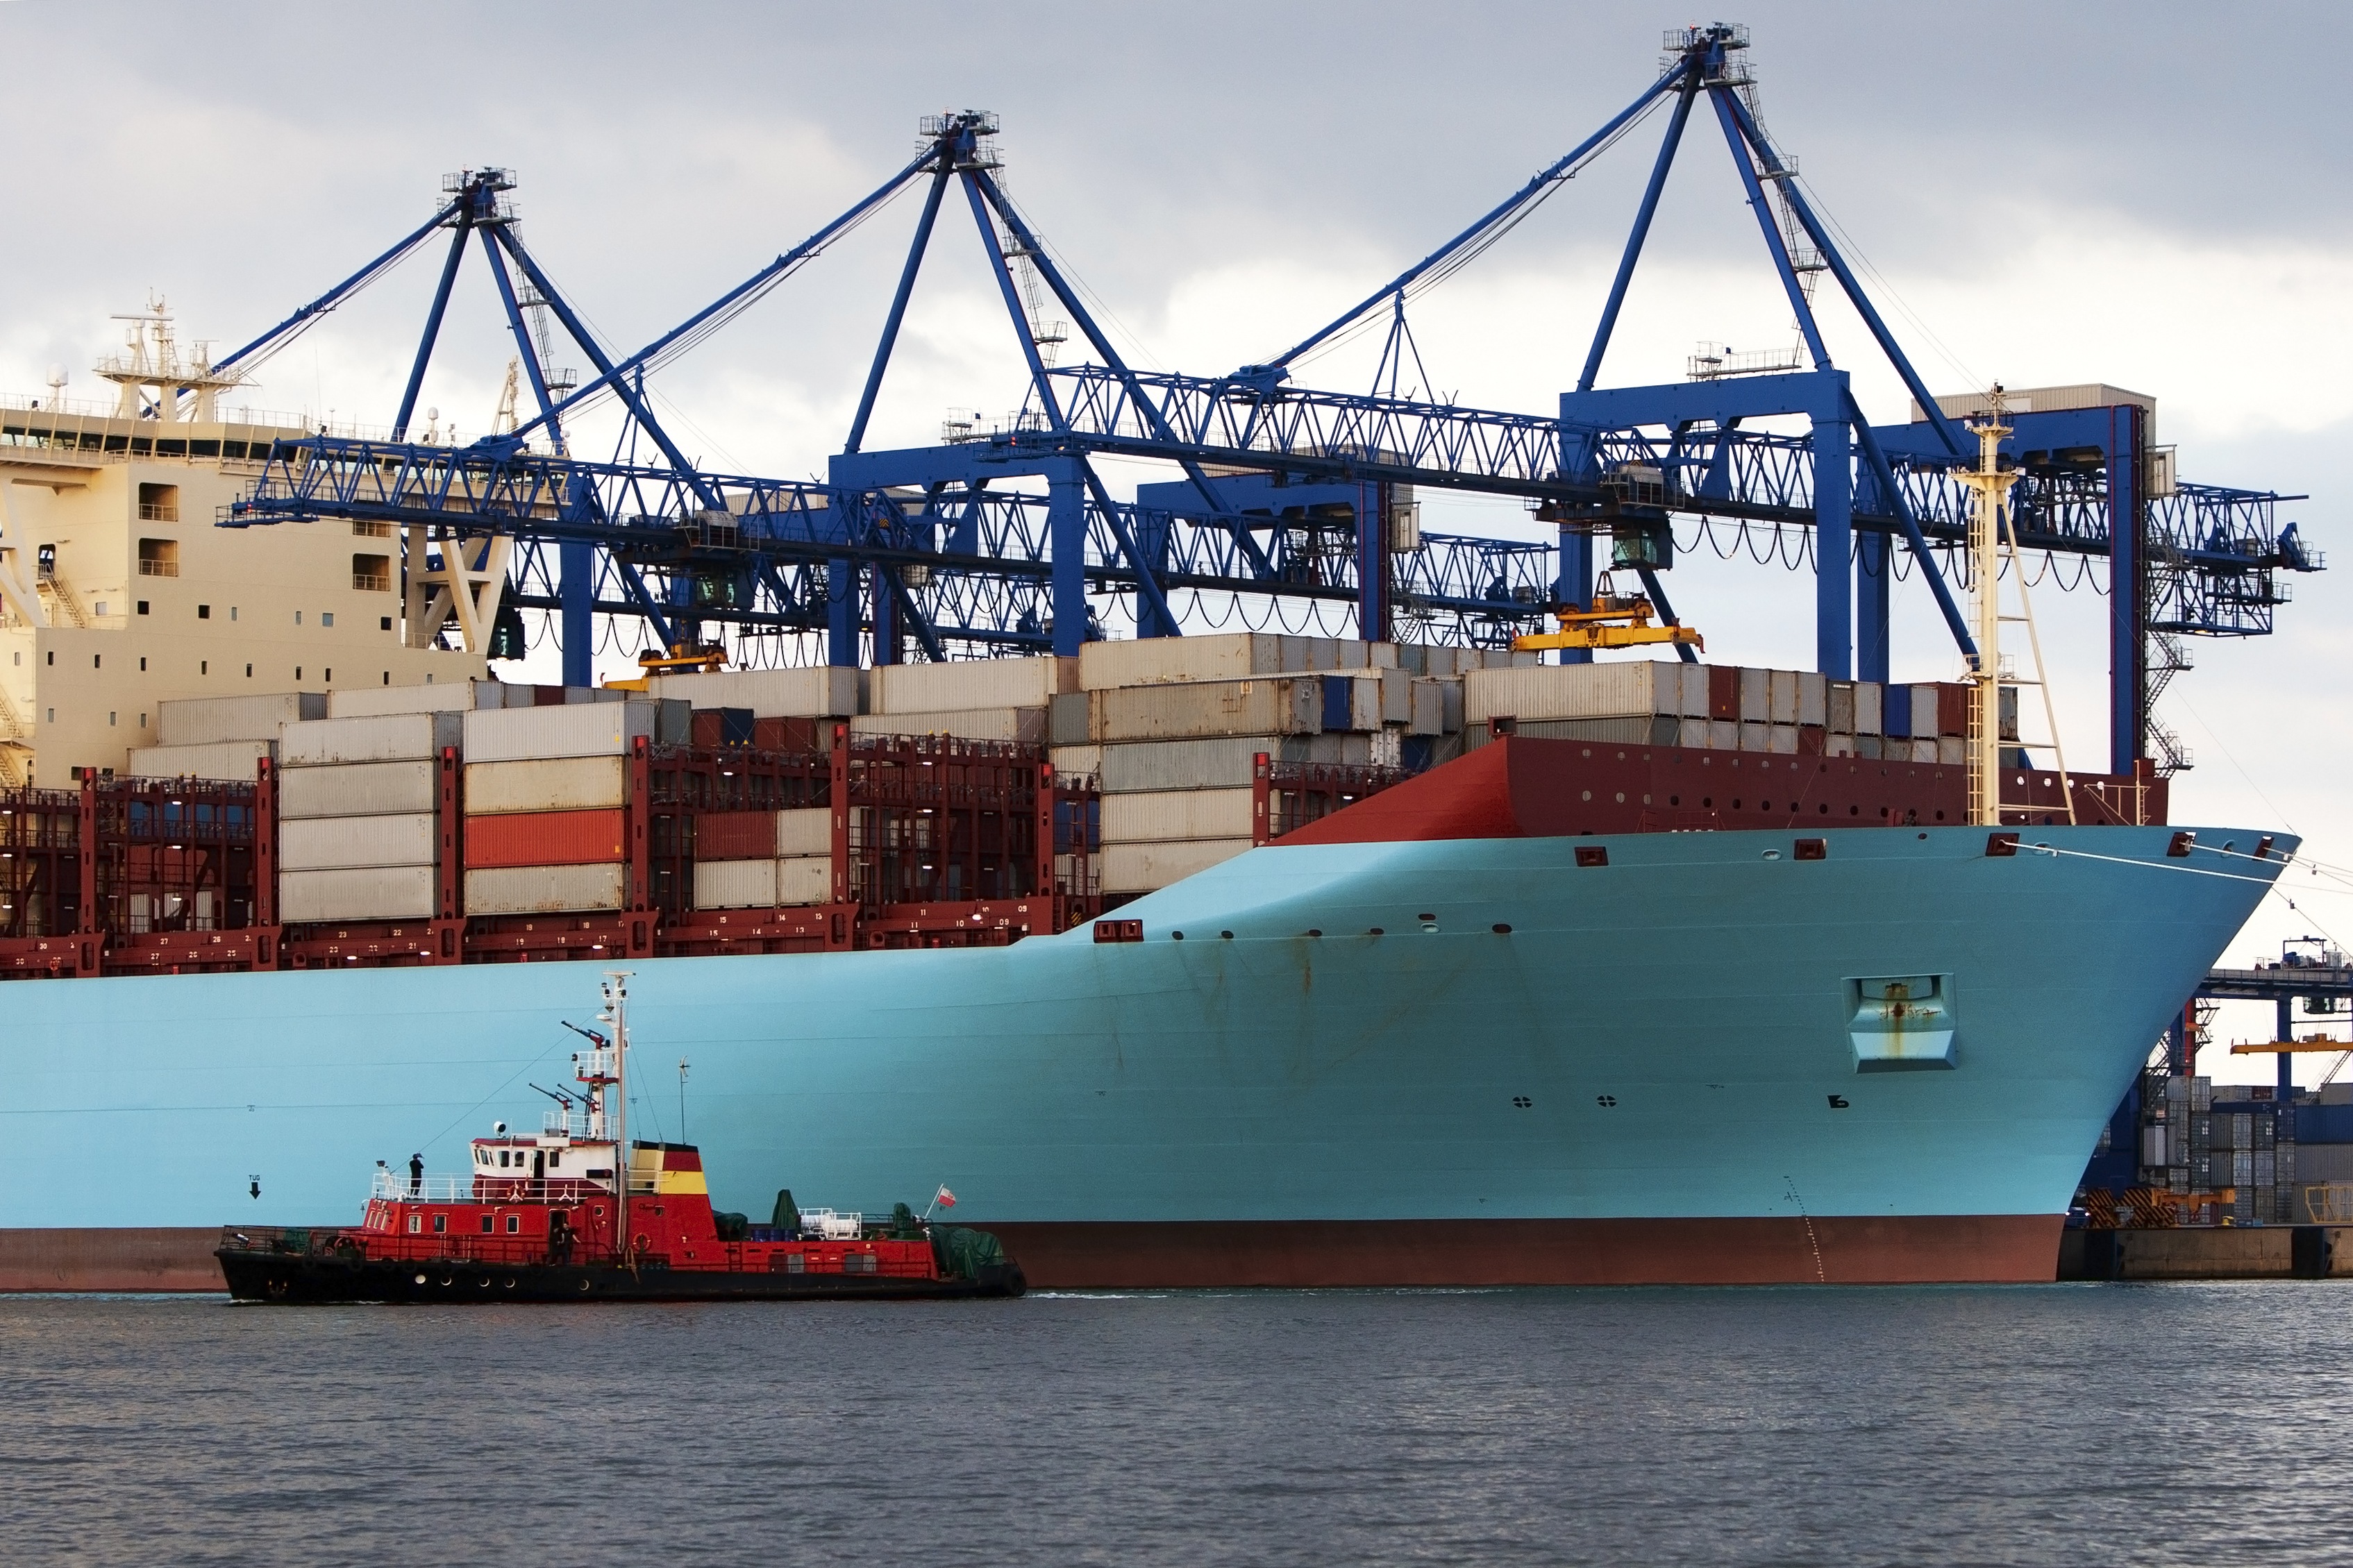 The largest container ship